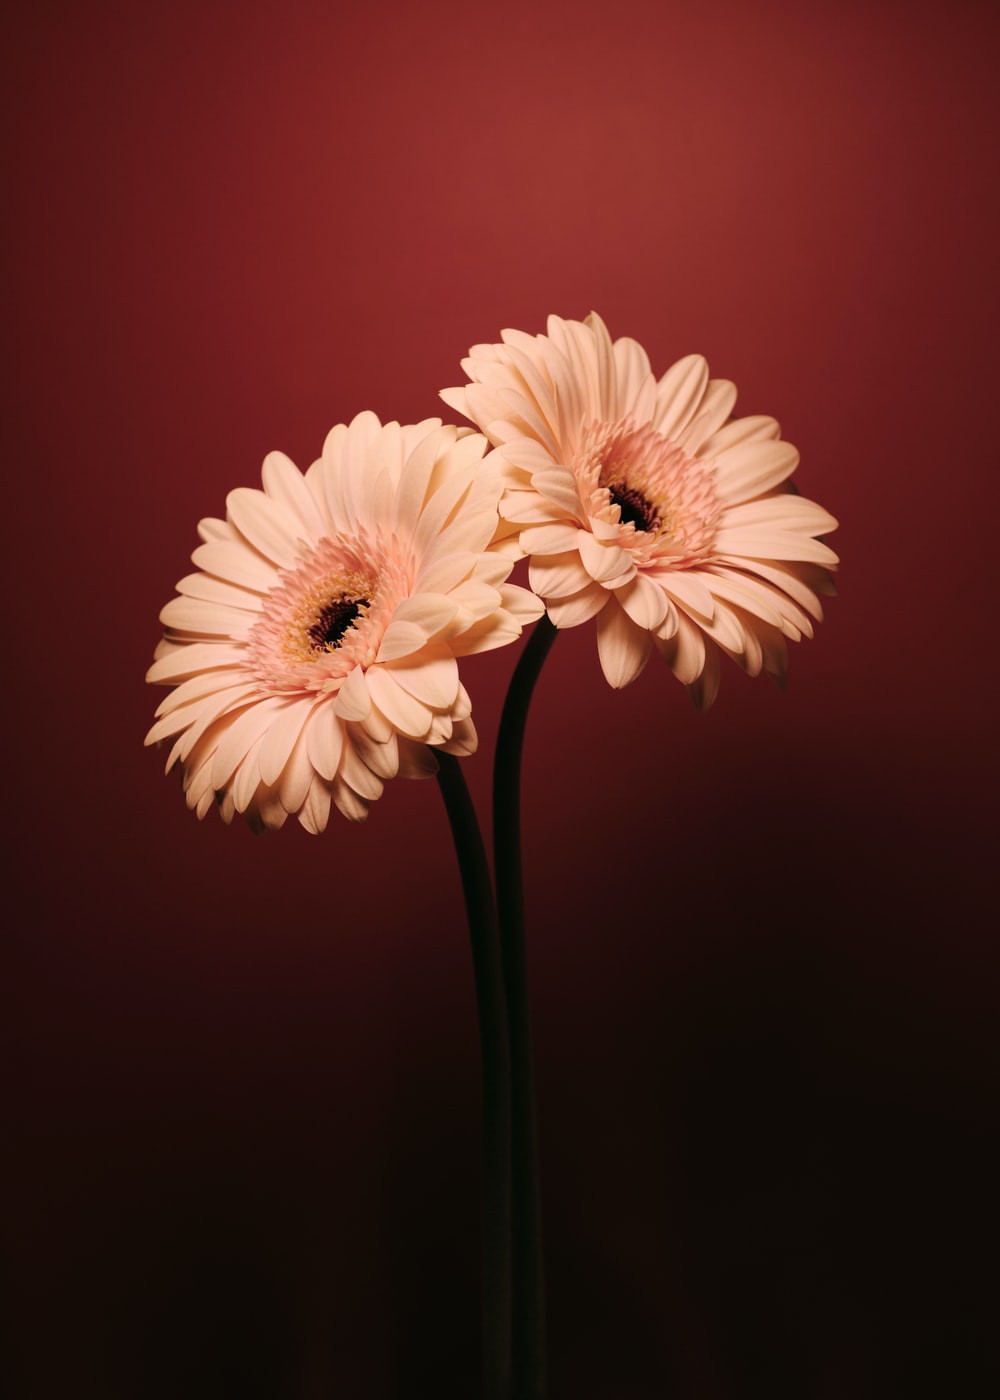 pink and white flower in close up photography photo Free Image